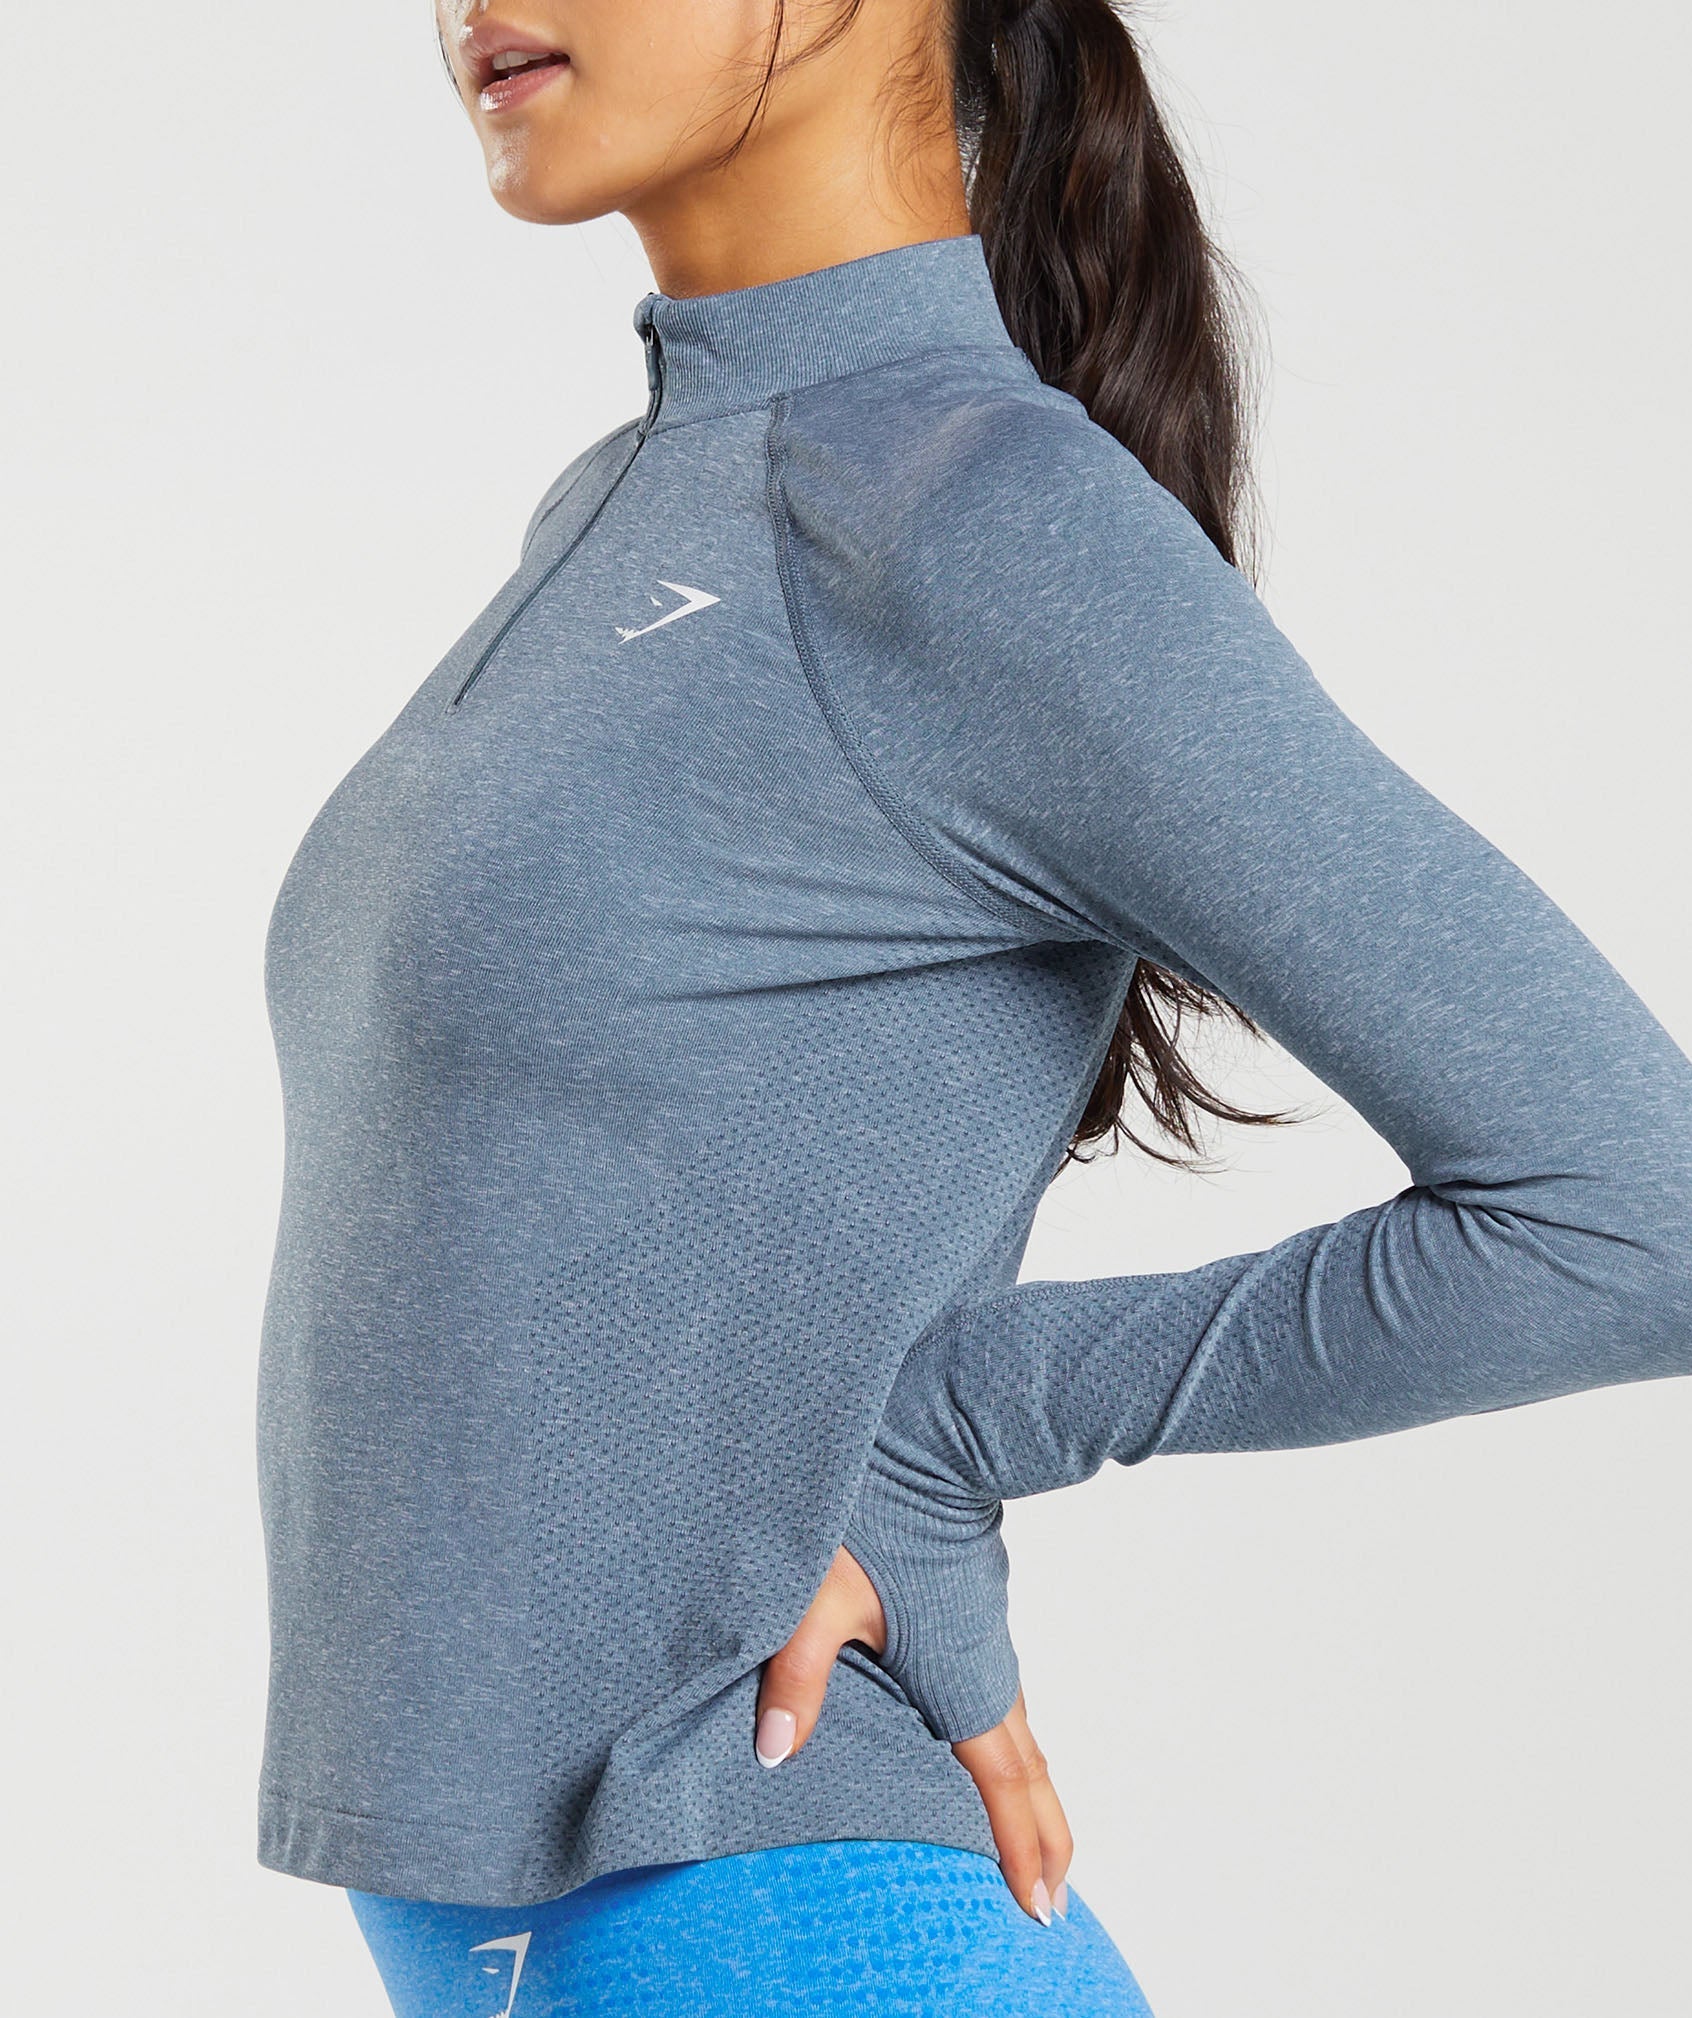 Vital Seamless 2.0 1/4 Track Top in Evening Blue Marl